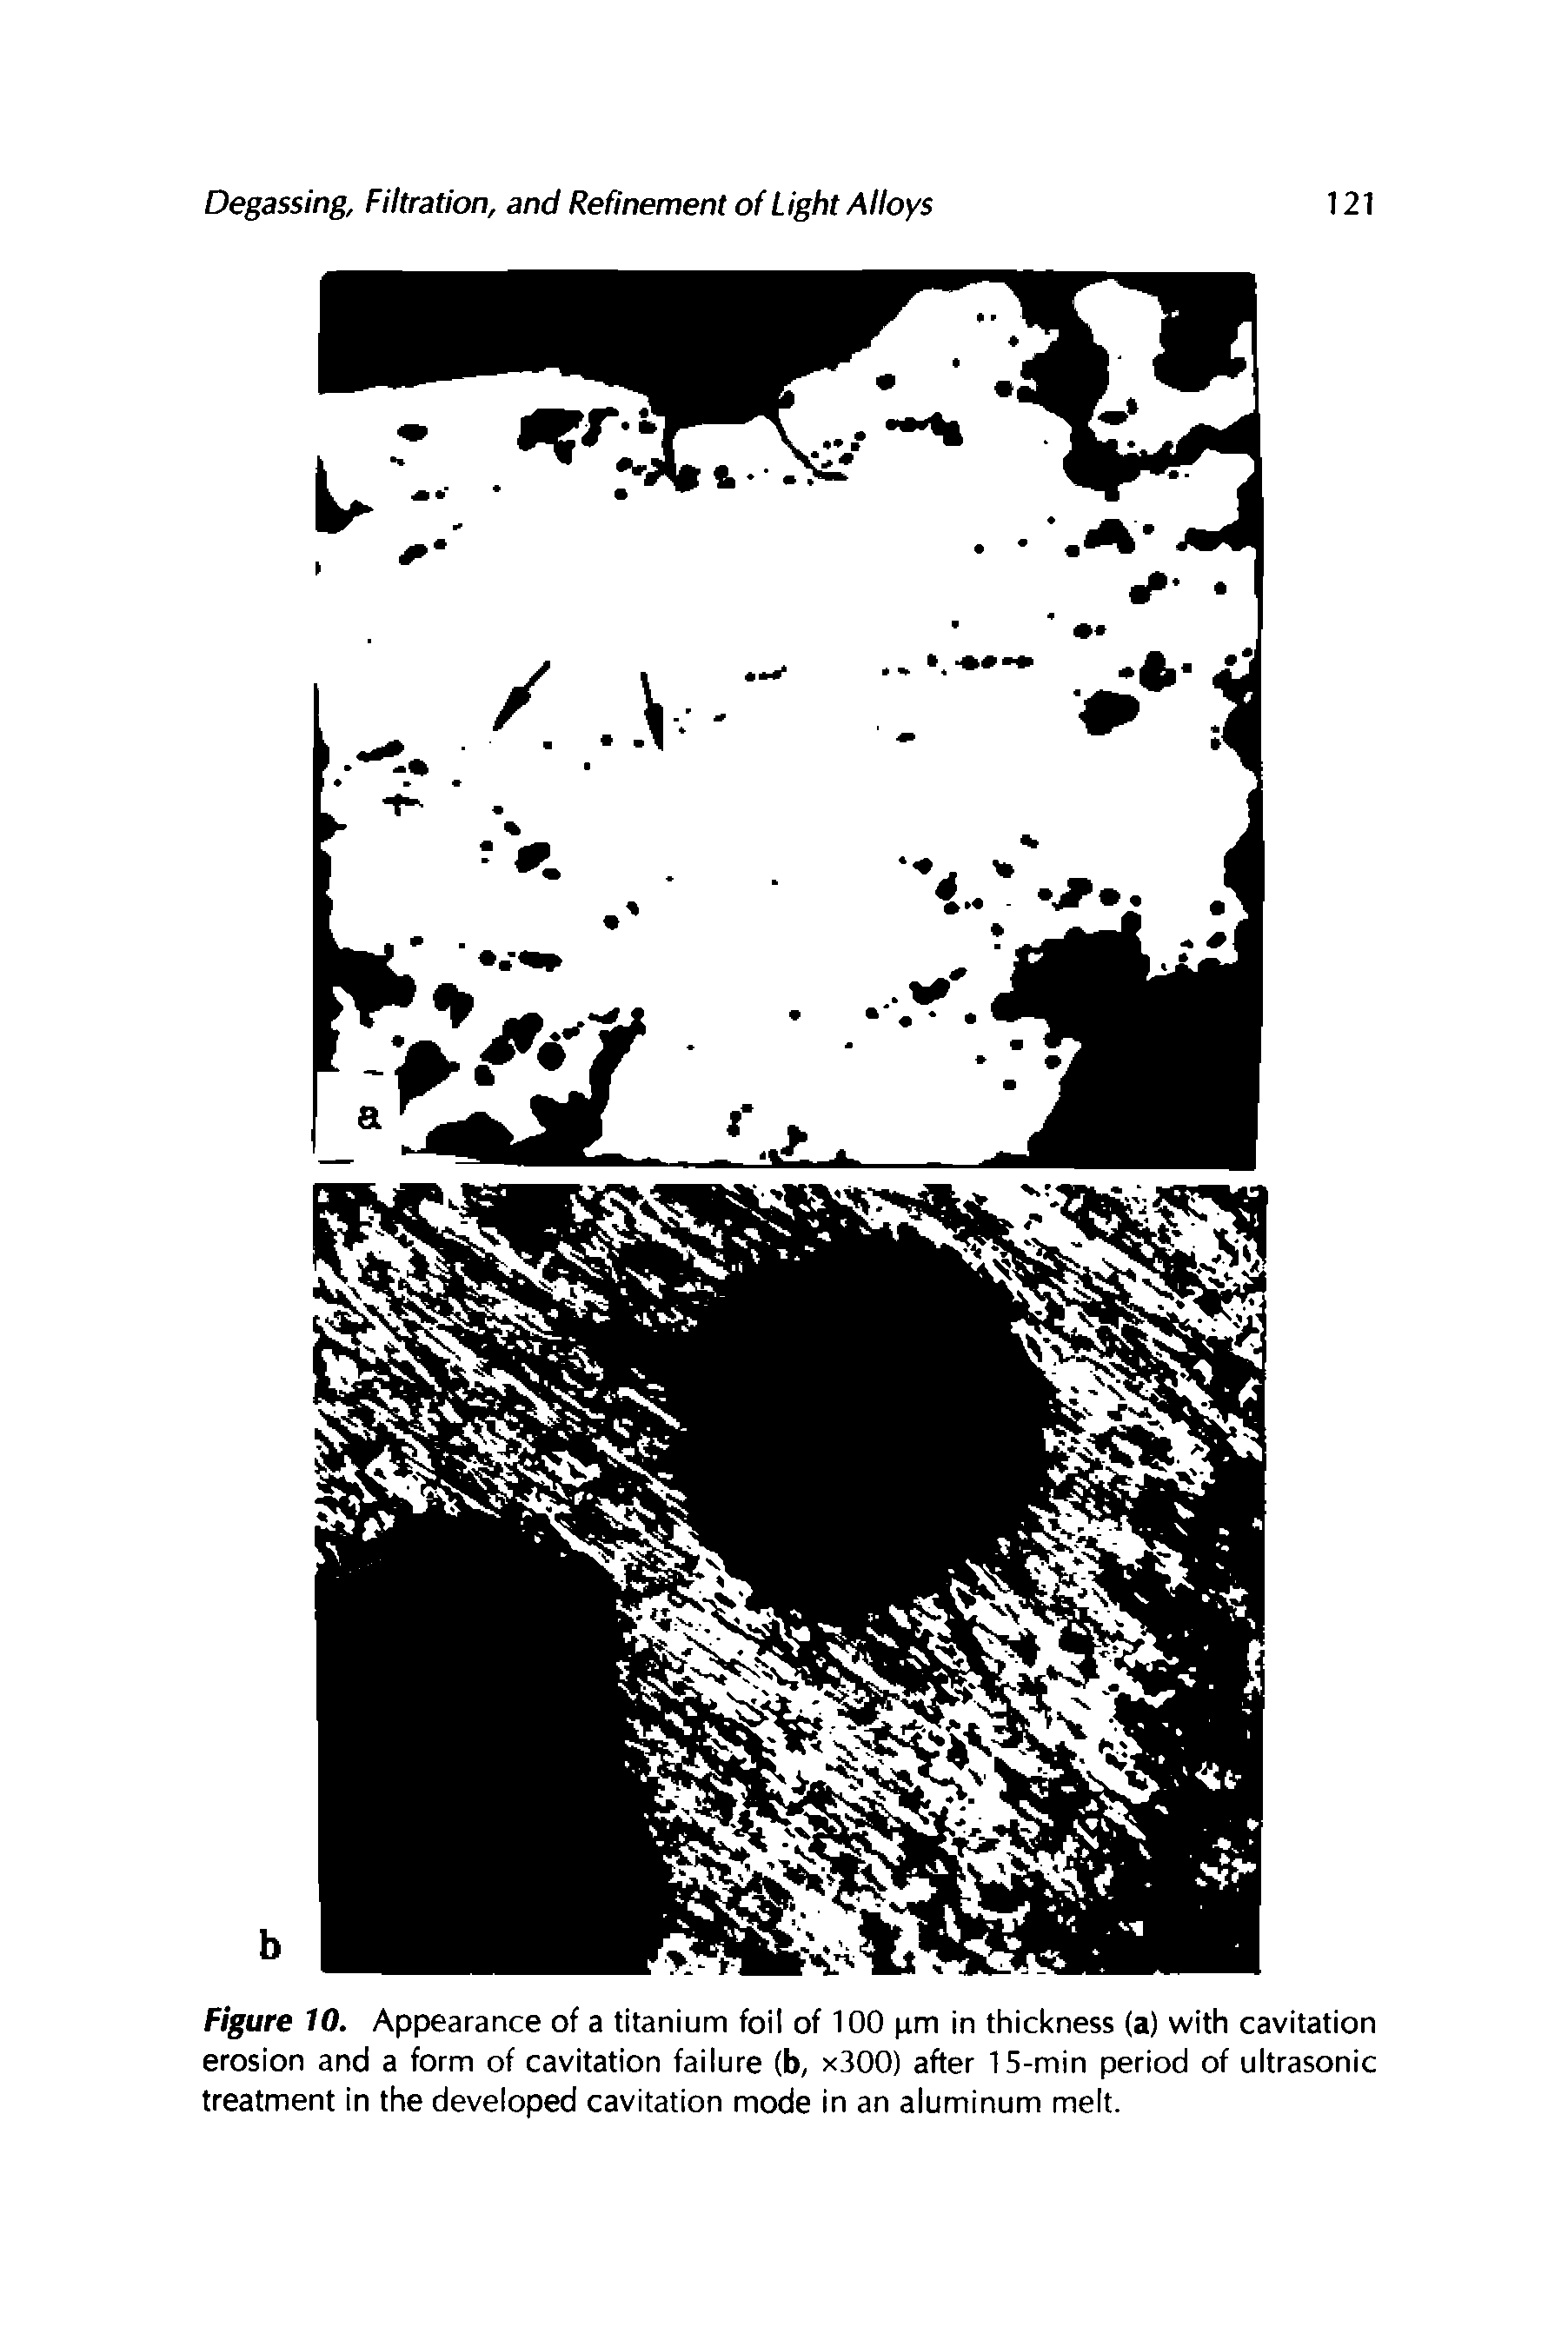 Figure 10. Appearance of a titanium foil of 100 pm in thickness (a) with cavitation erosion and a form of cavitation failure (b, x300) after 15-min period of ultrasonic treatment in the developed cavitation mode in an aluminum melt.